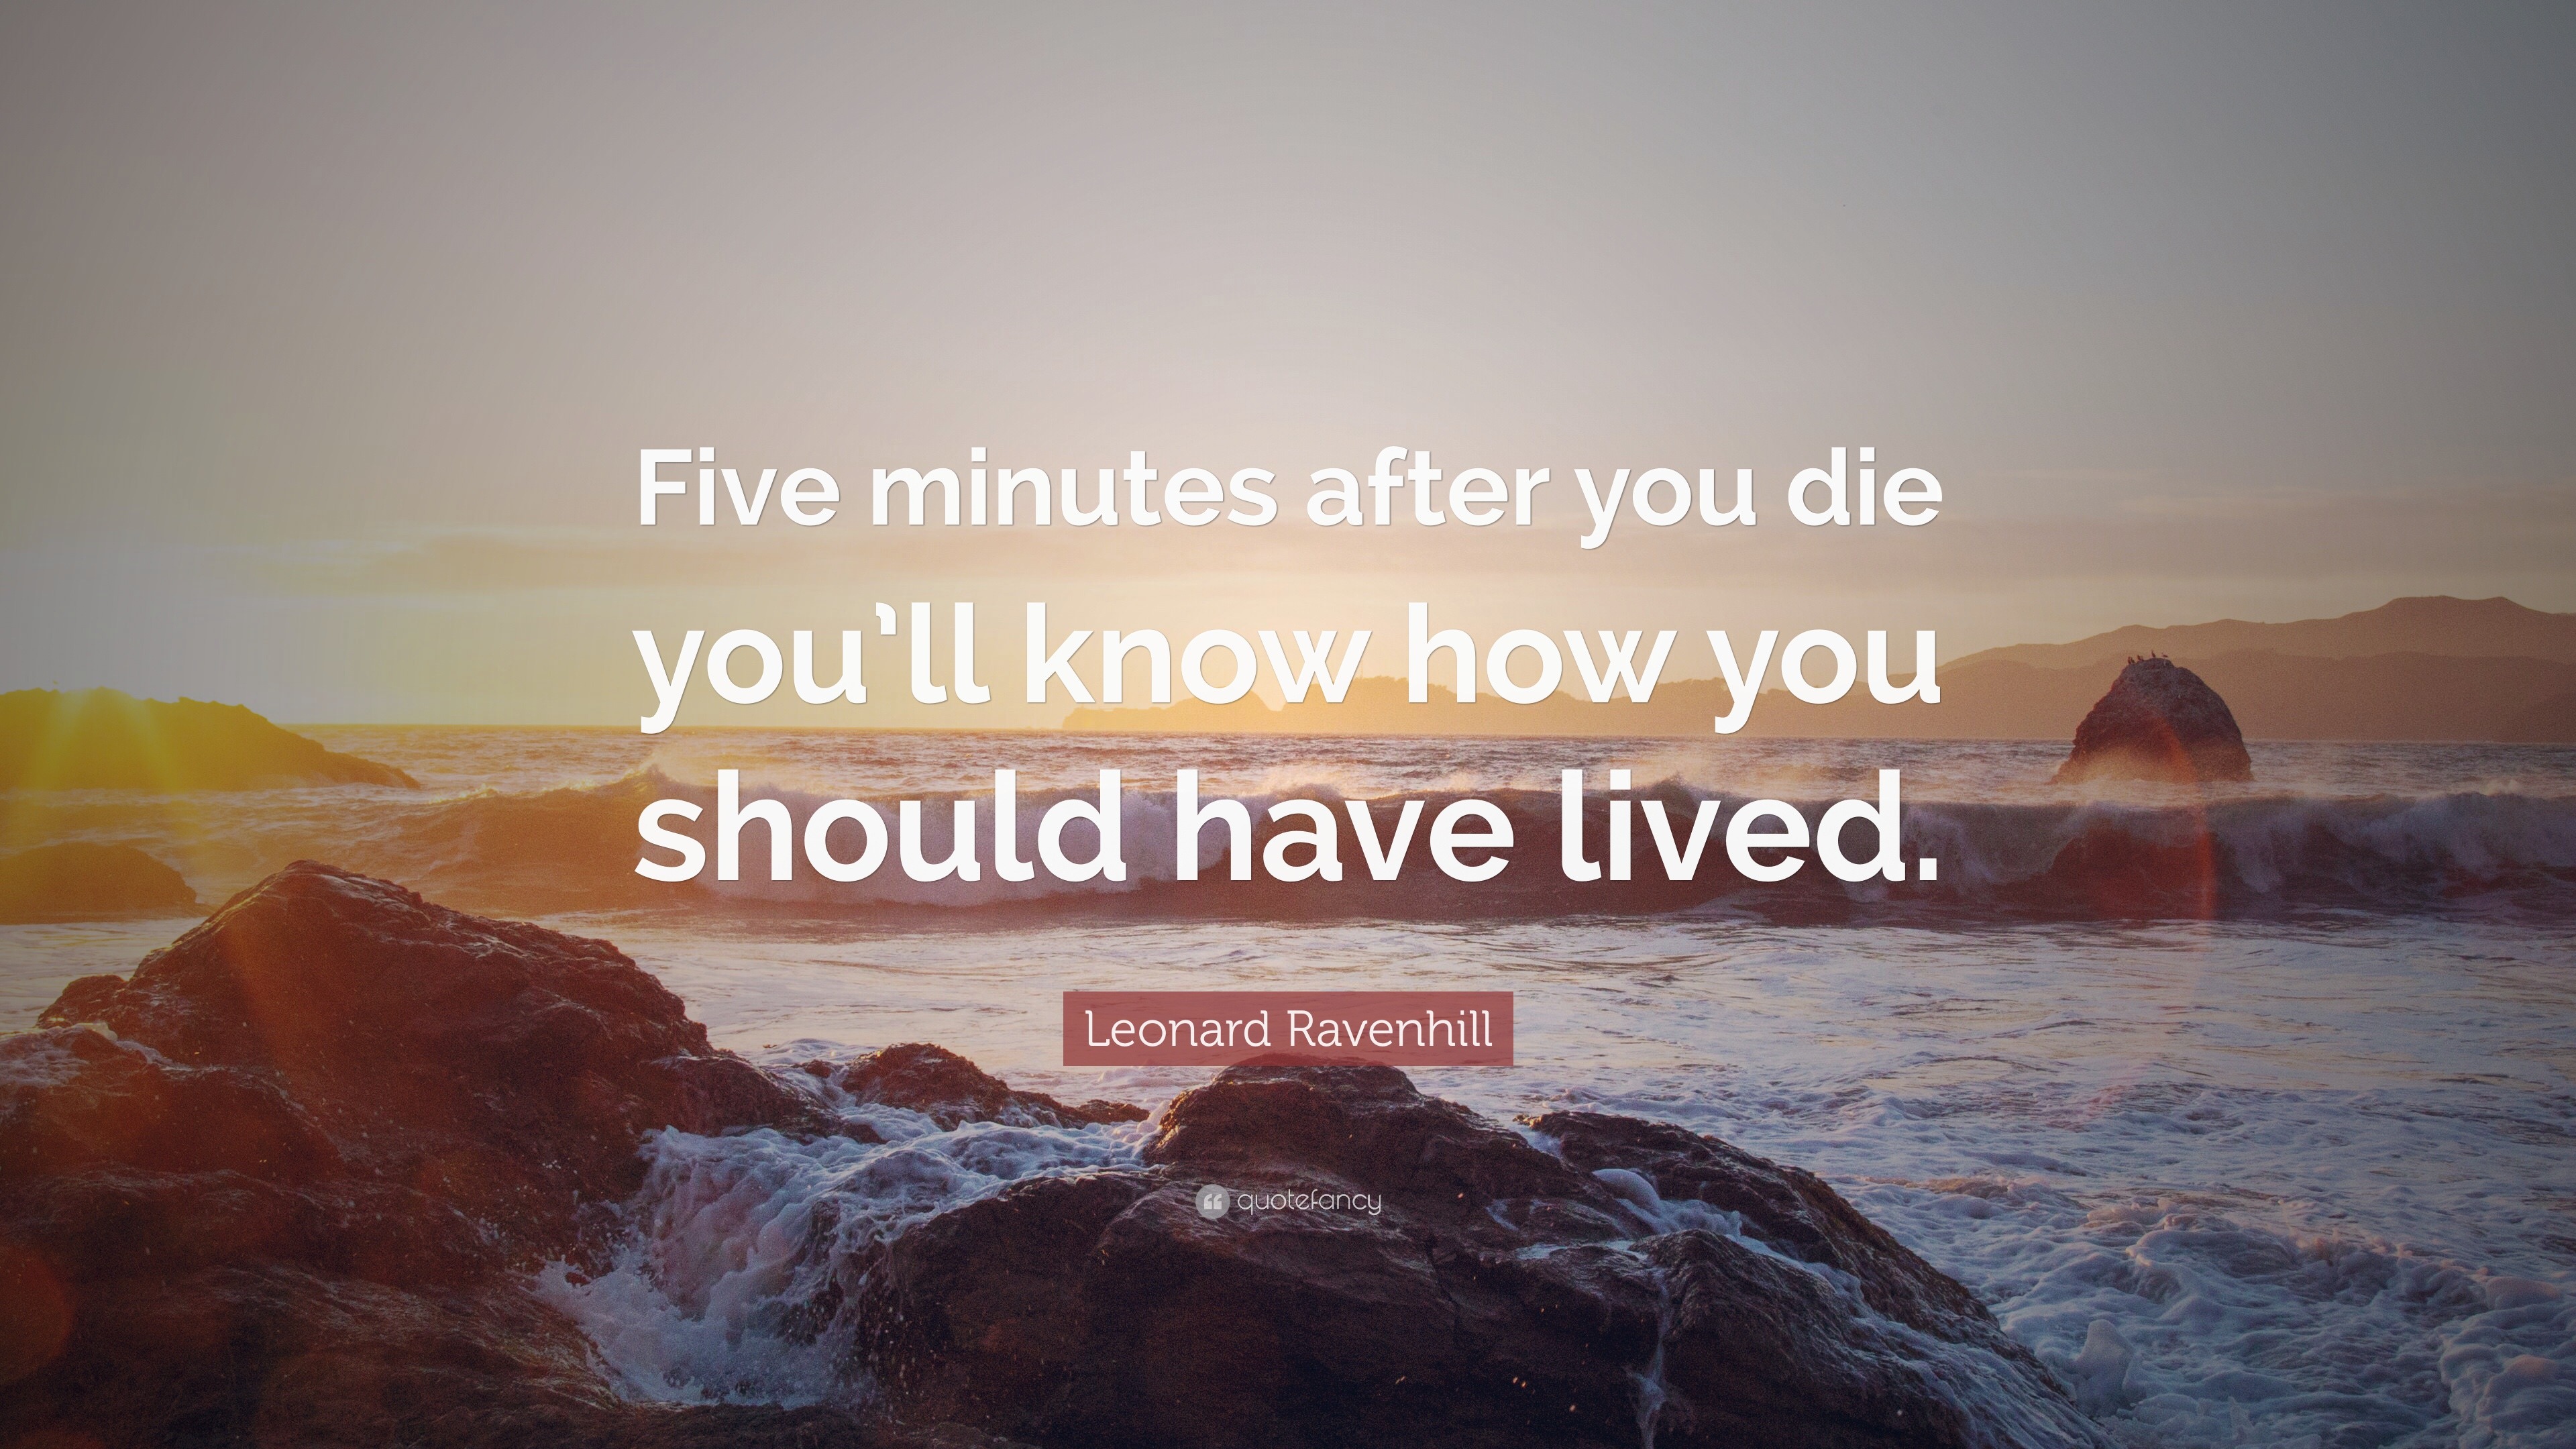 Leonard Ravenhill Quote: “Five minutes after you die you’ll know how ...